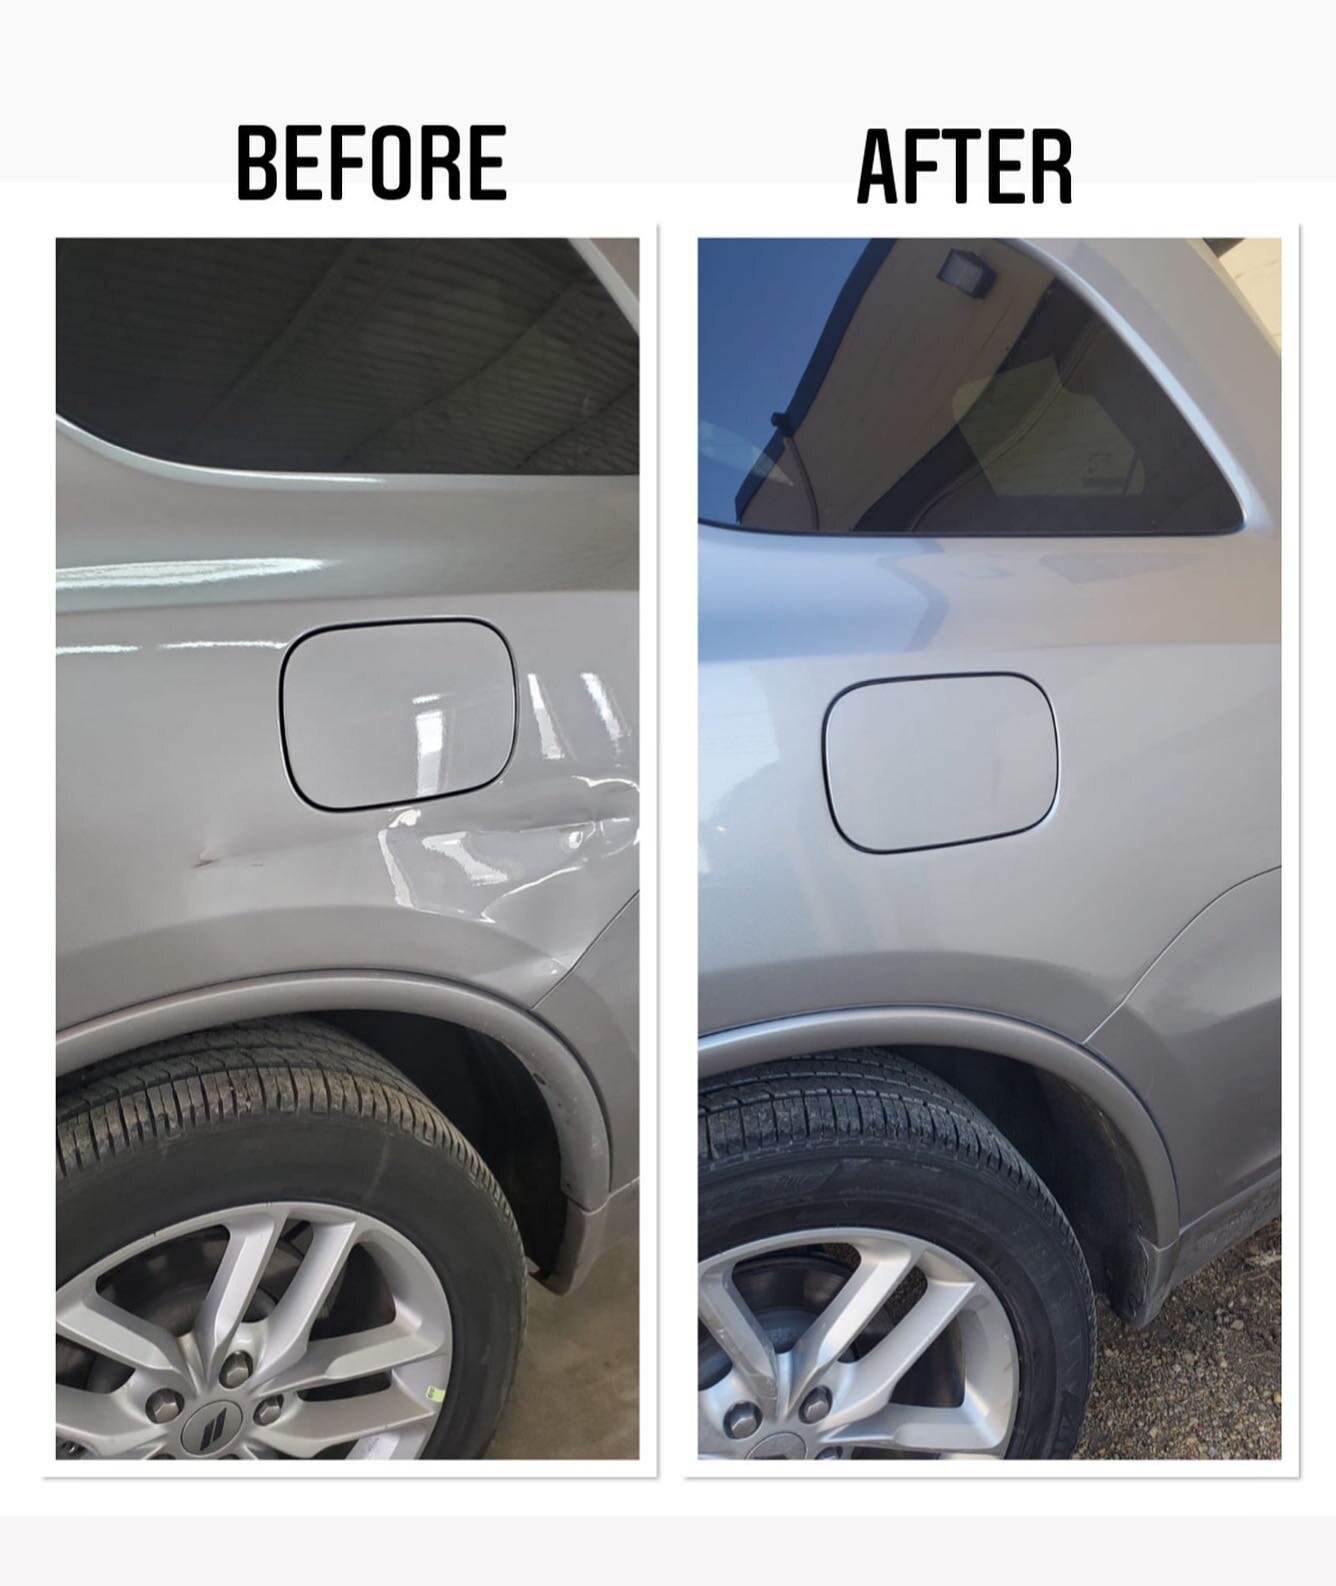 We offer so many automotive services but did you know we can repair dents and scrapes as well.